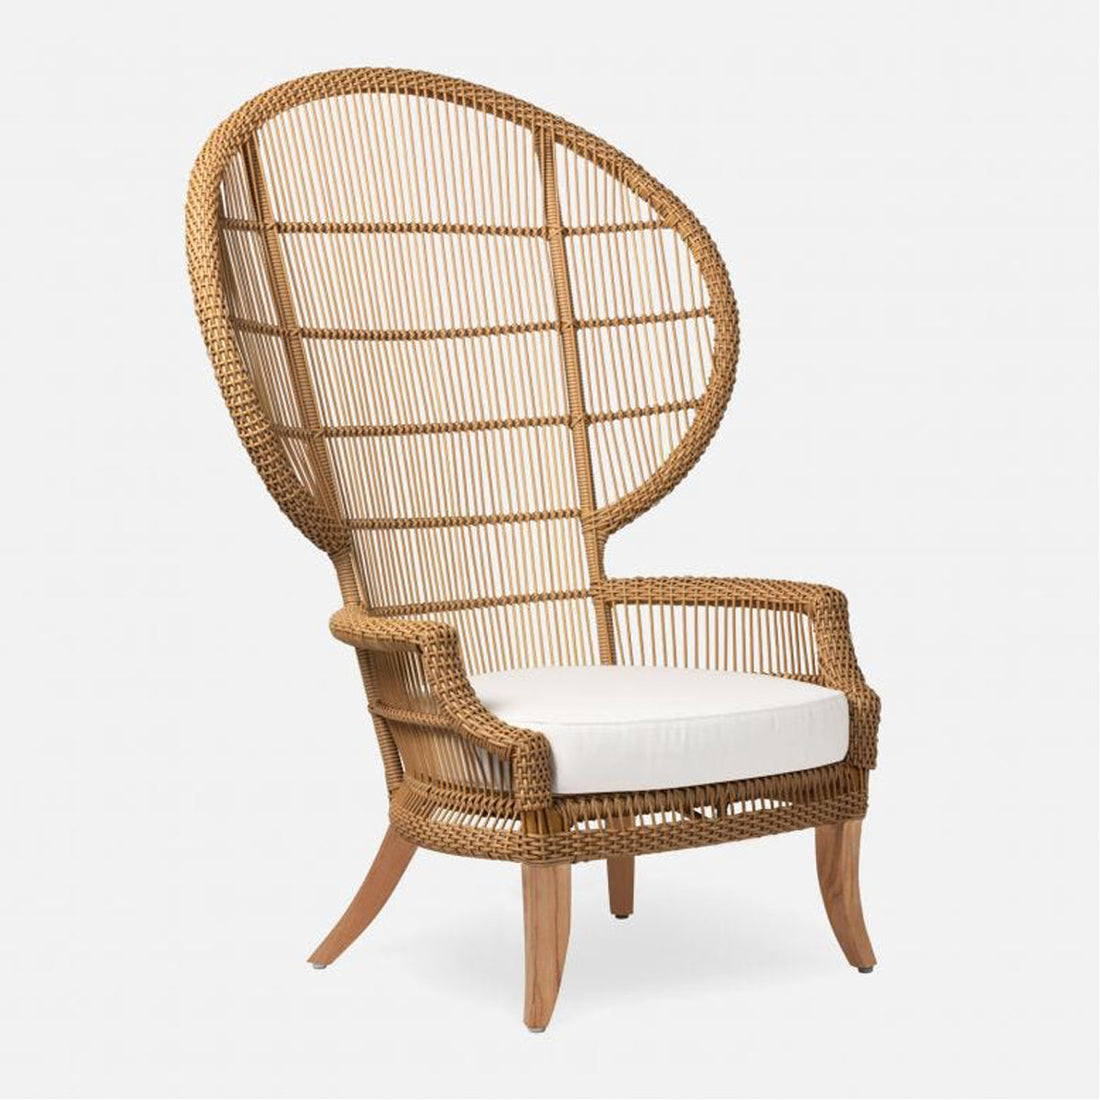 Made Goods Aurora Woven Wingback Outdoor Lounge Chair in Alsek Fabric